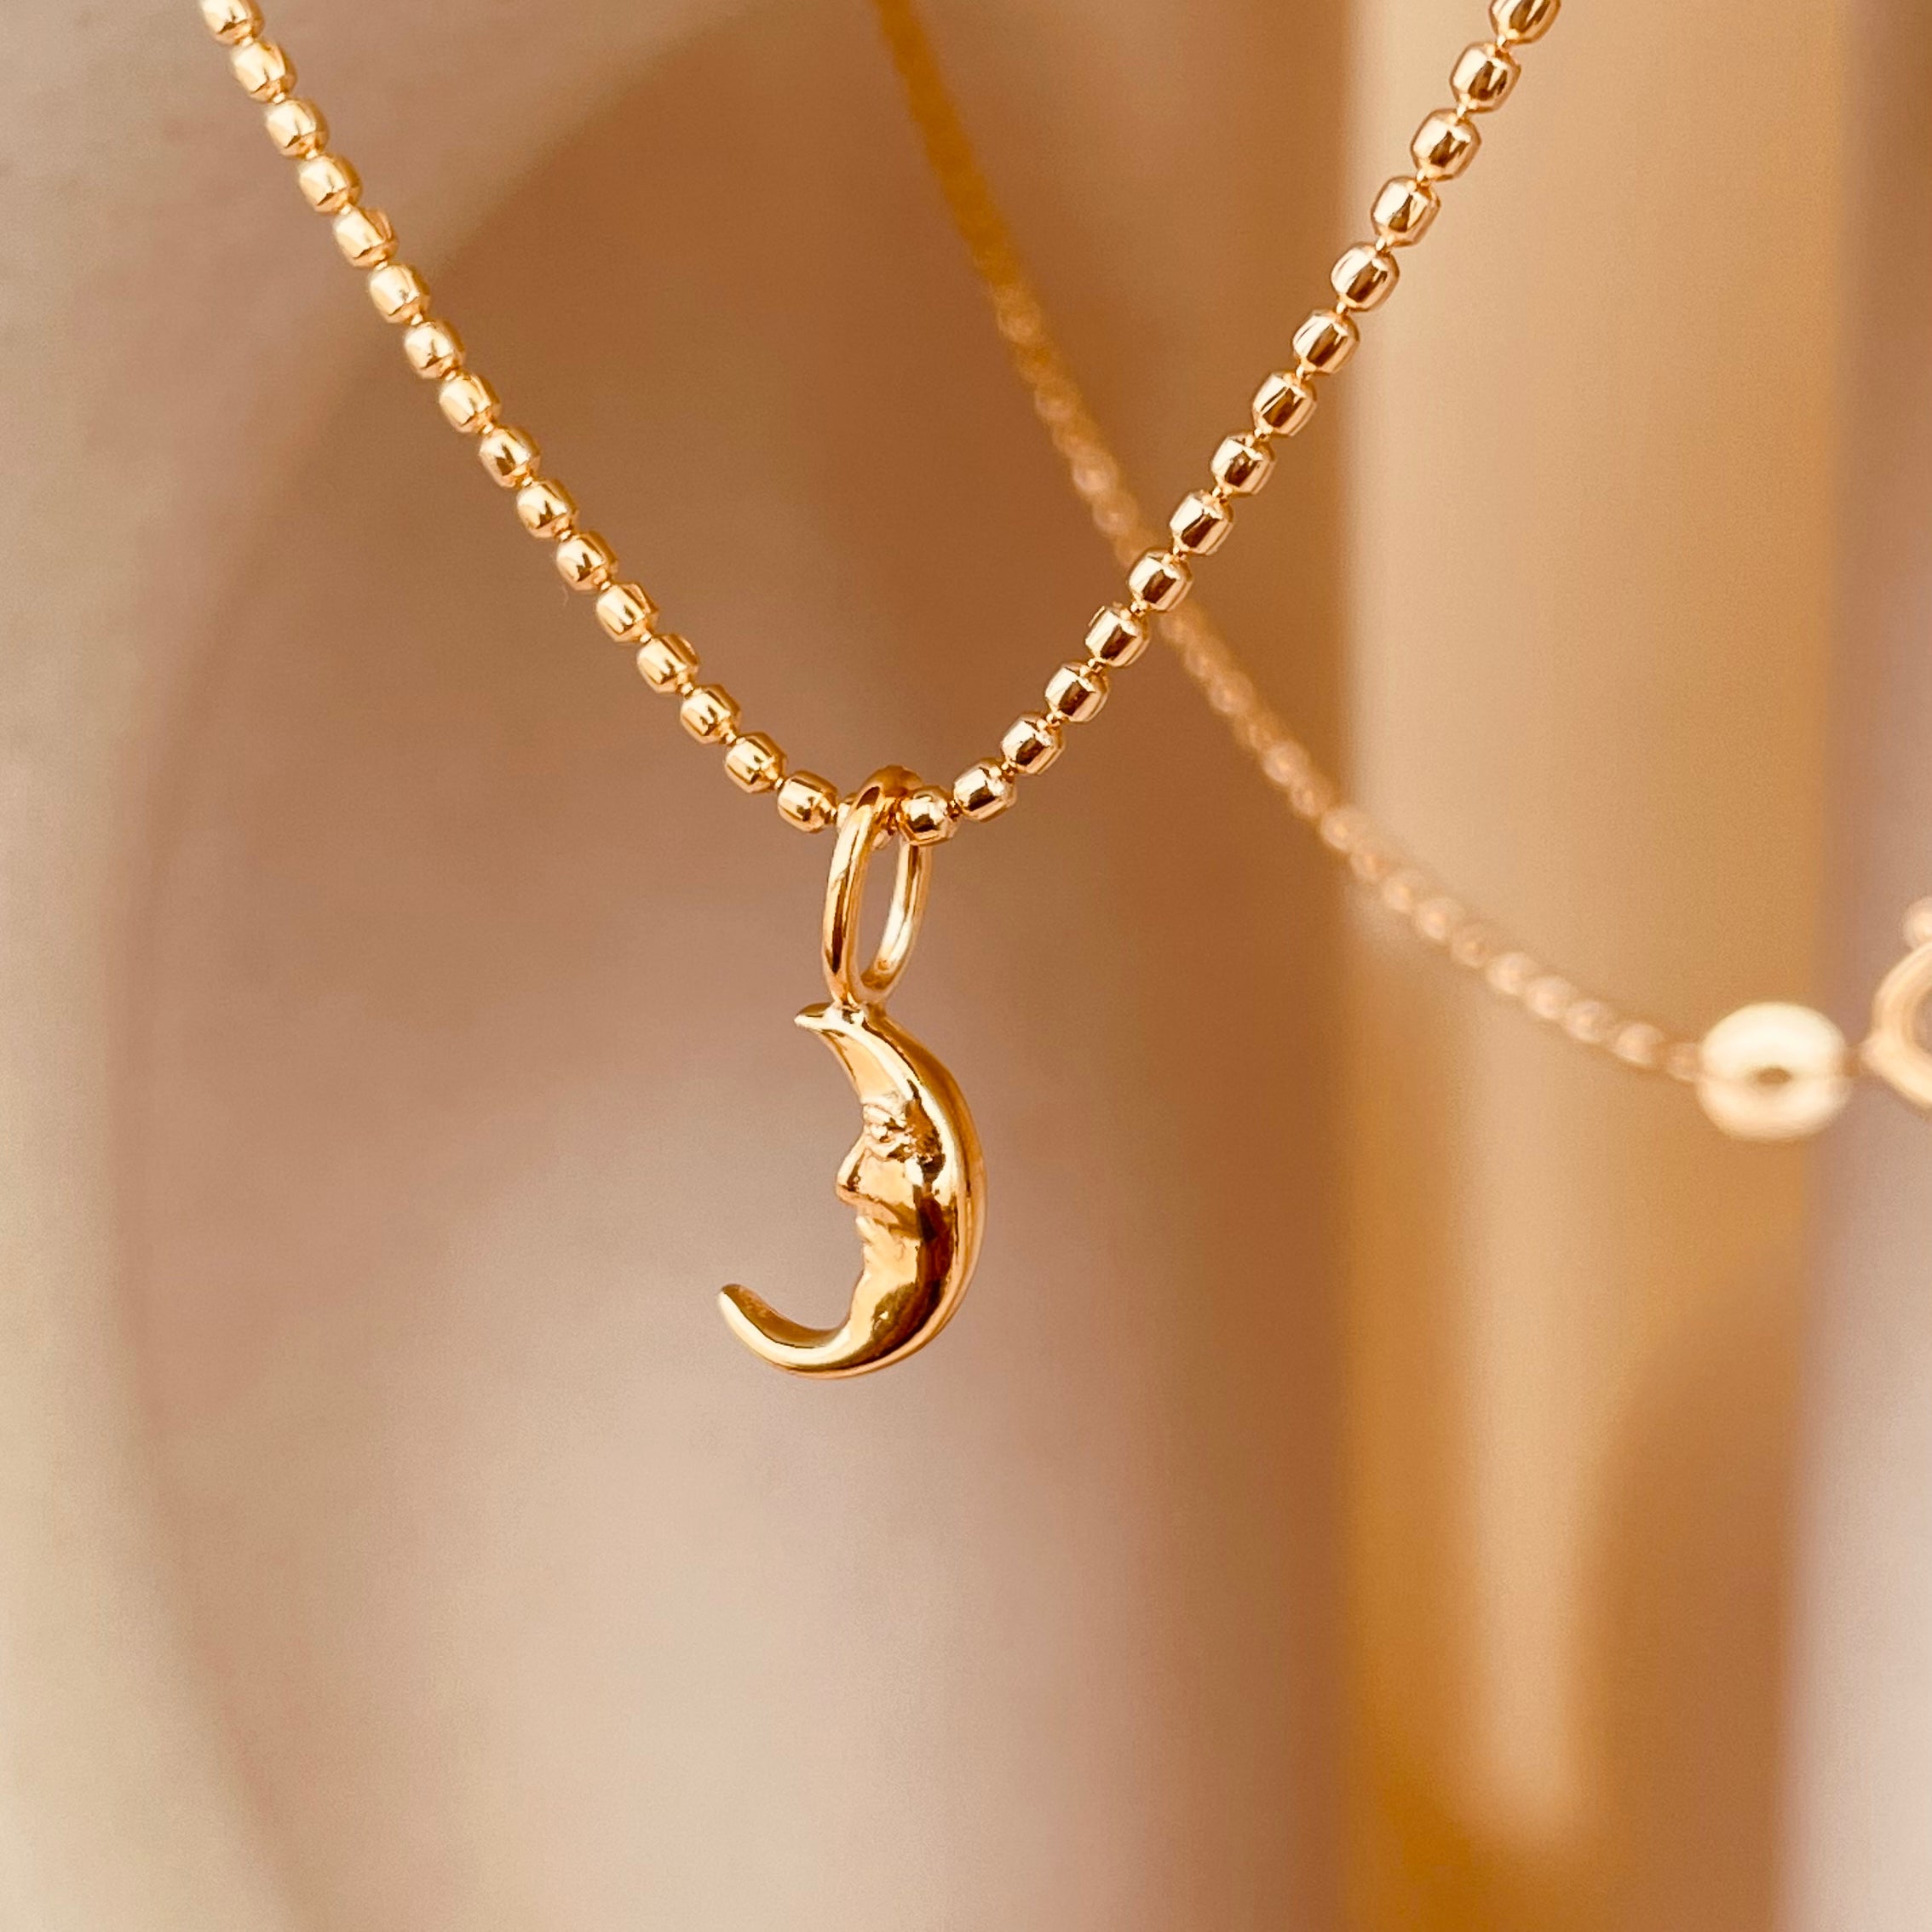 Crescent Moon Necklace with Faceted Ball Chain - Octonov 